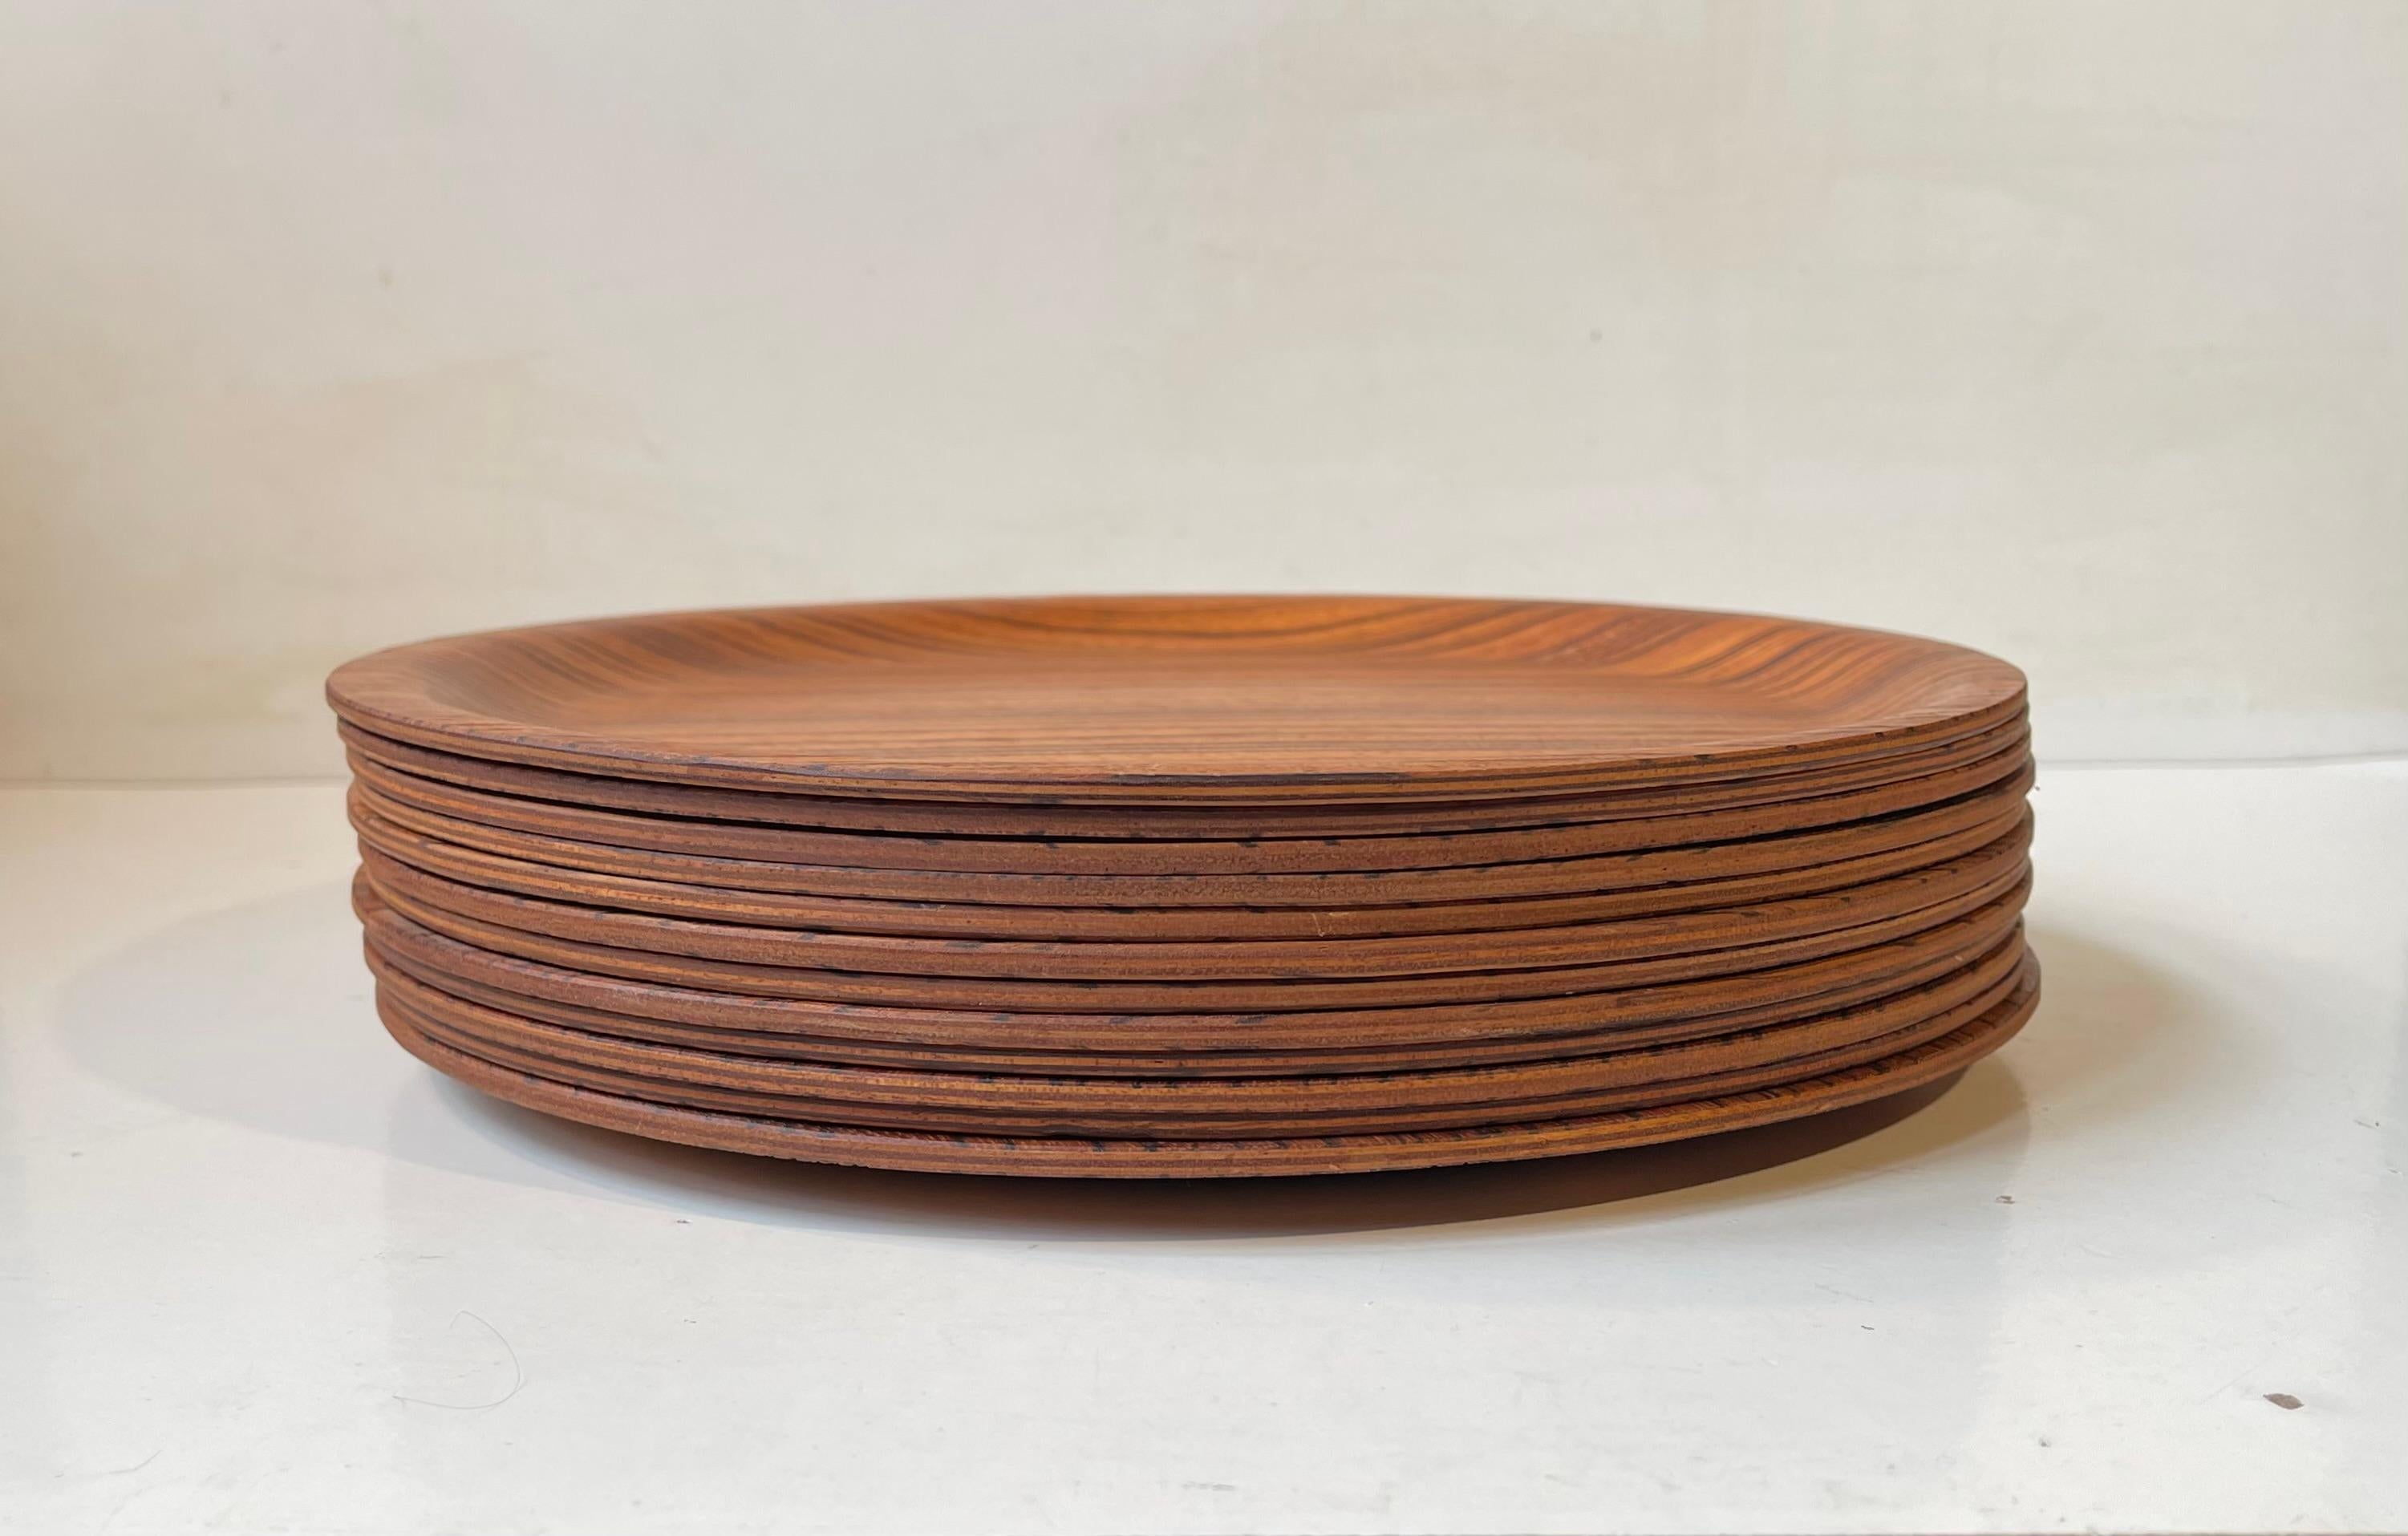 Pressed 12 Scandinavian Modern Plates in Zebrawood, 1960s For Sale